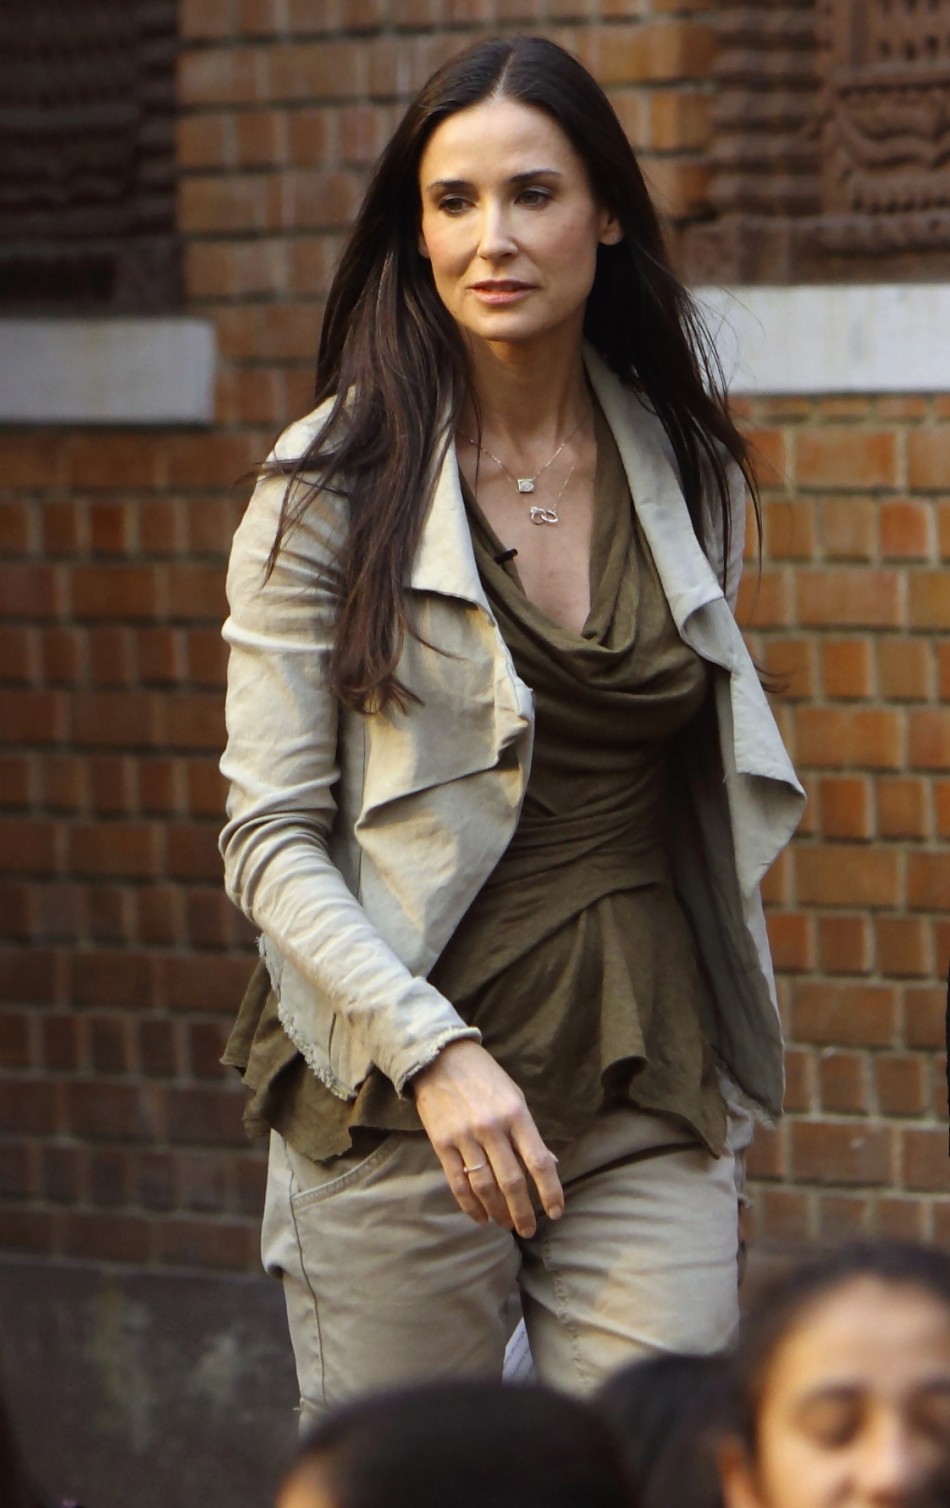 Actress Demi Moore arrives for a news conference in Kathmandu